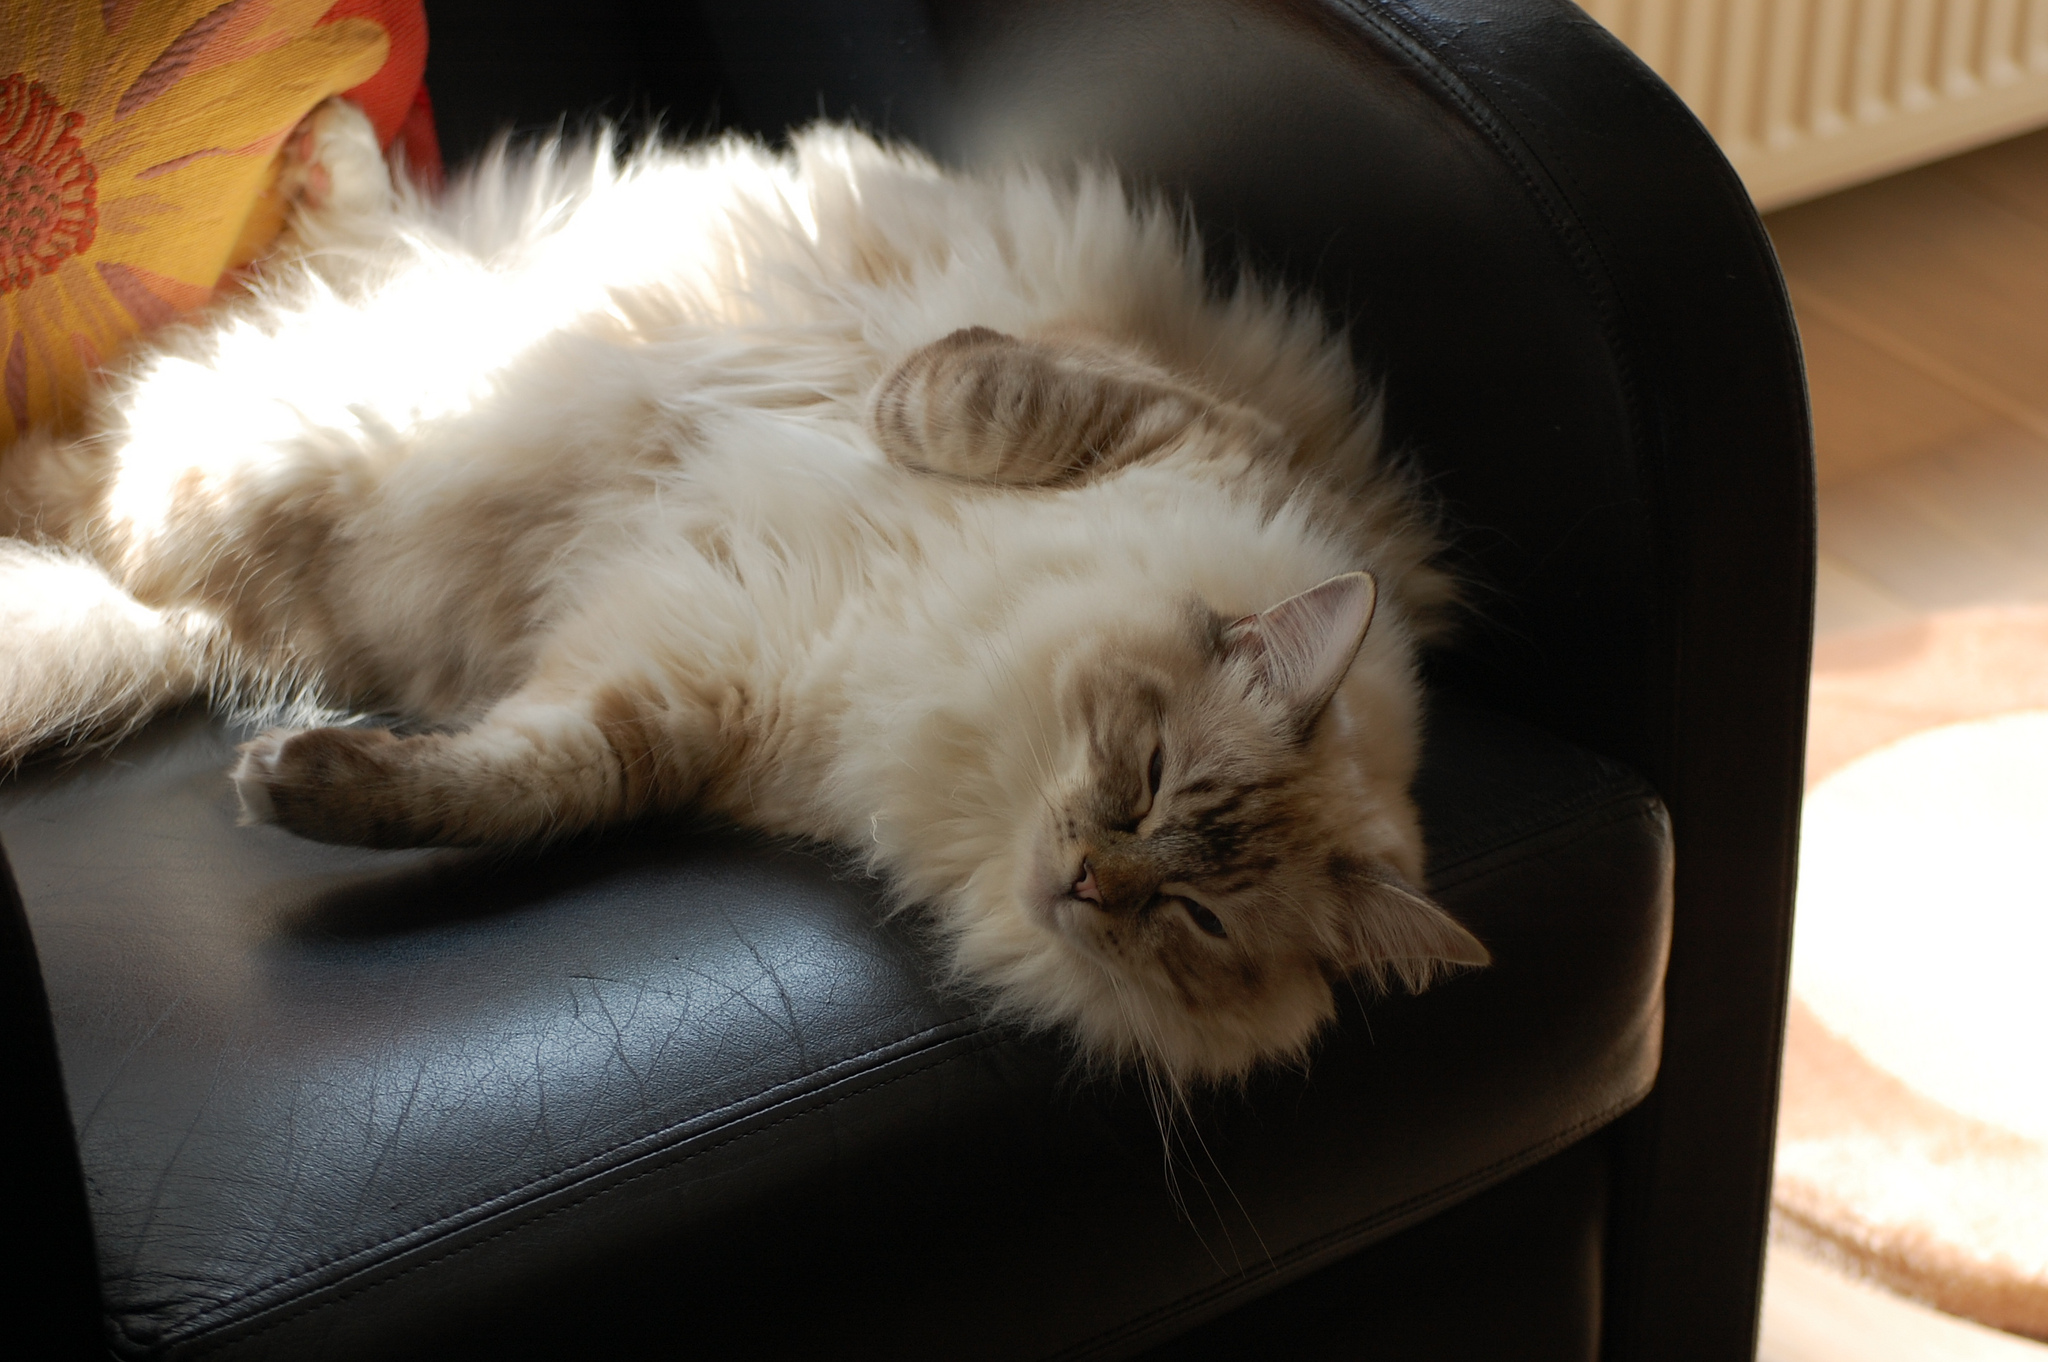 Ragdoll is resting on the couch